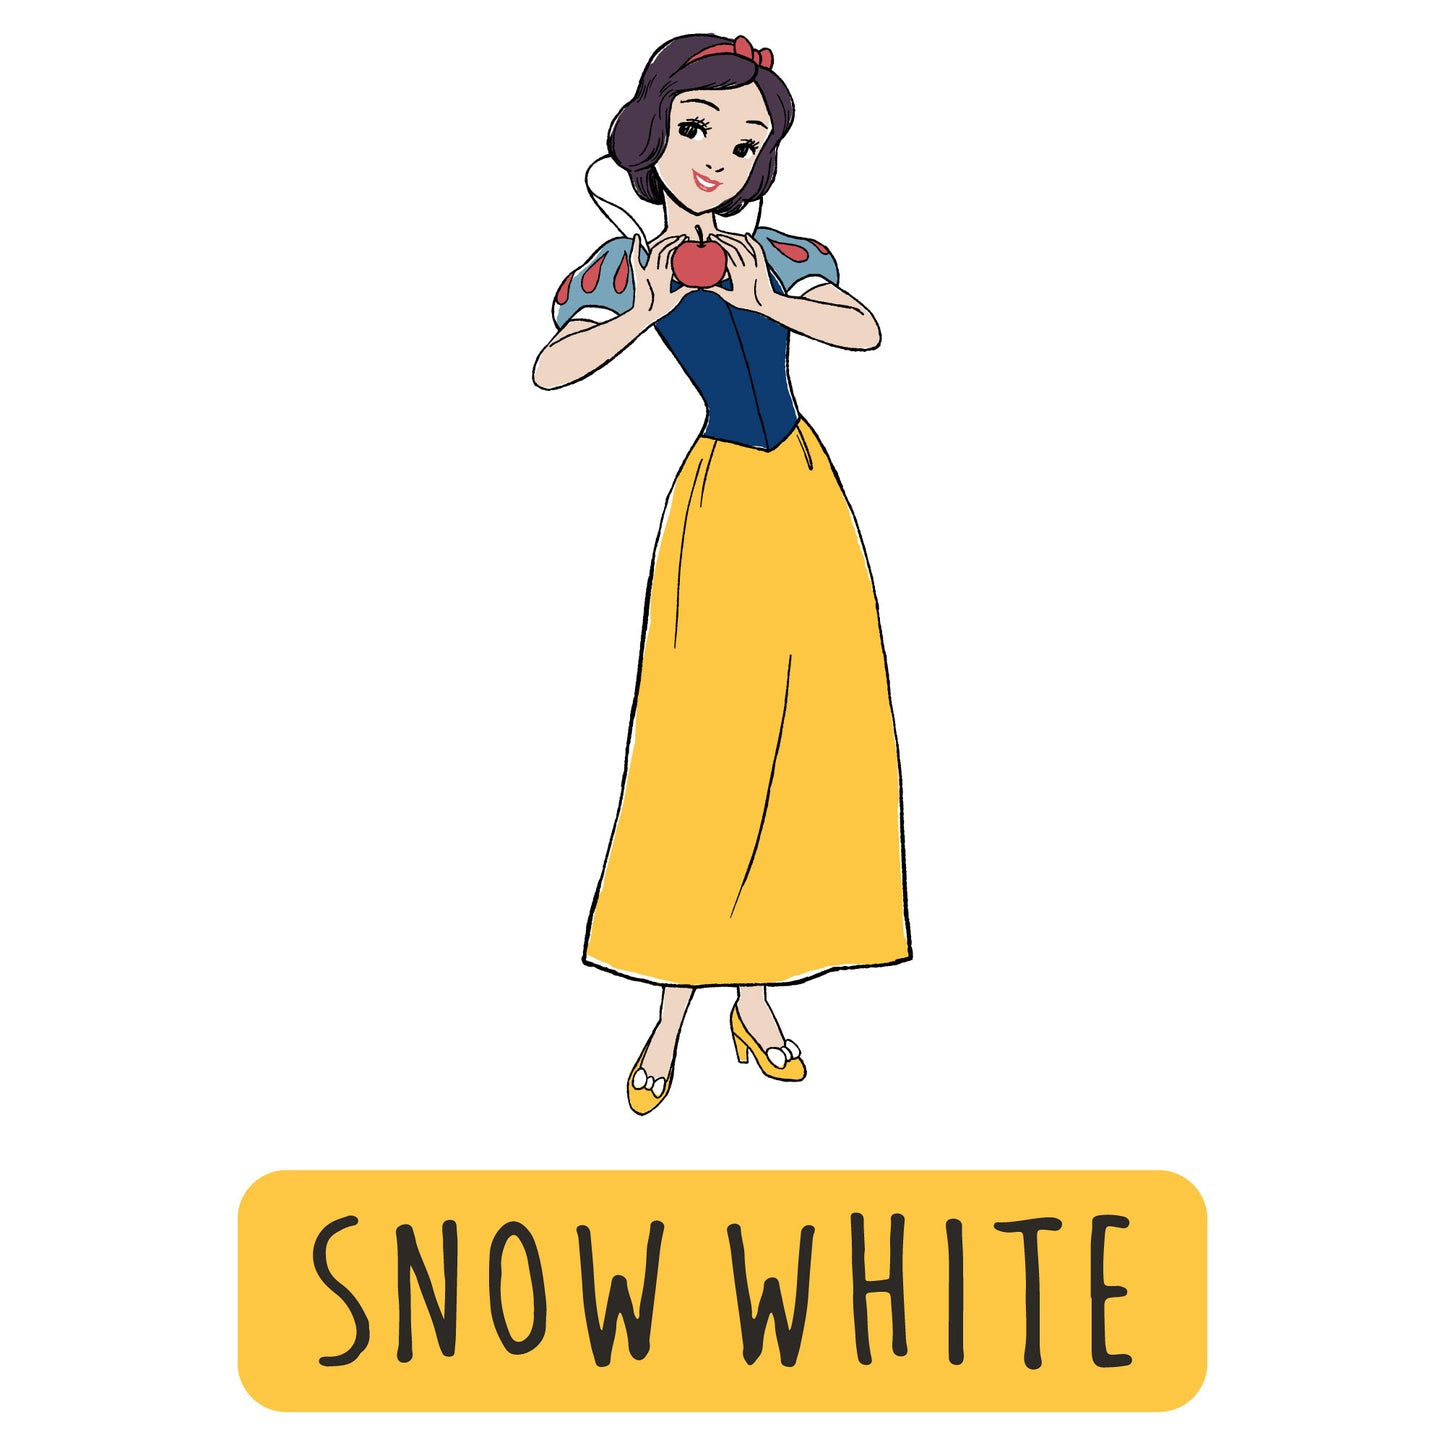 Sheet of 4 -Princesses: Snow White Minis        - Officially Licensed Disney Removable Wall   Adhesive Decal